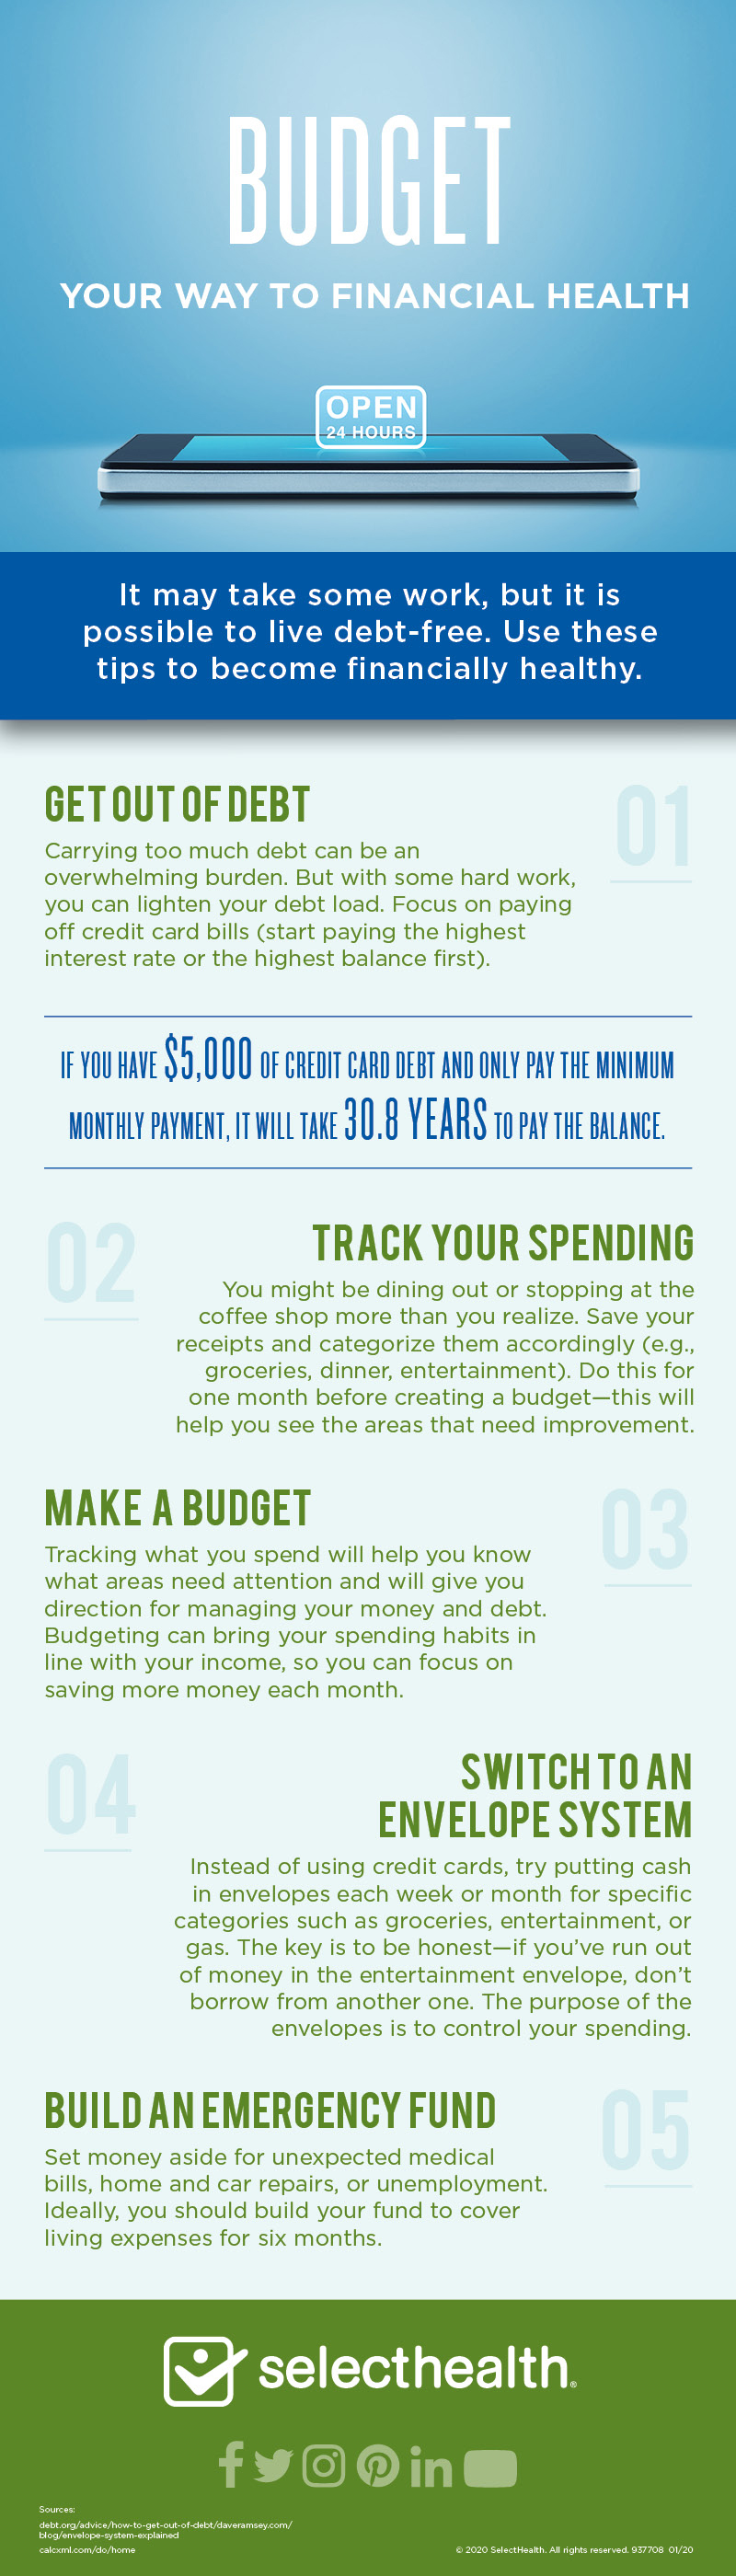 Infographic with tips for staying financially healthy, money saving tips